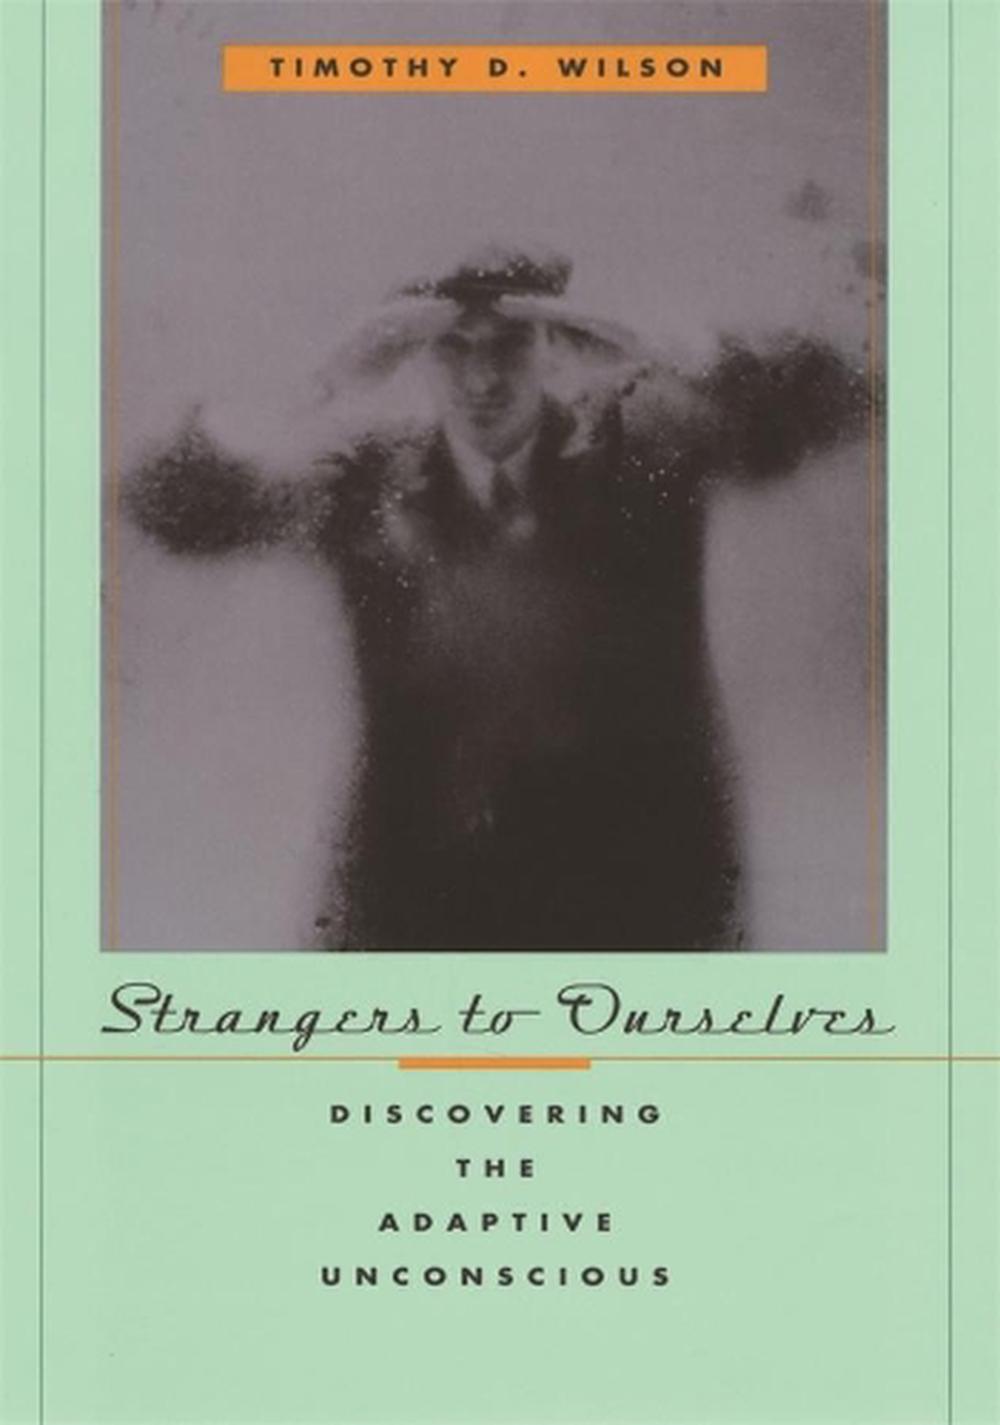 Strangers to Ourselves Discovering the Adaptive Unconscious by Timothy